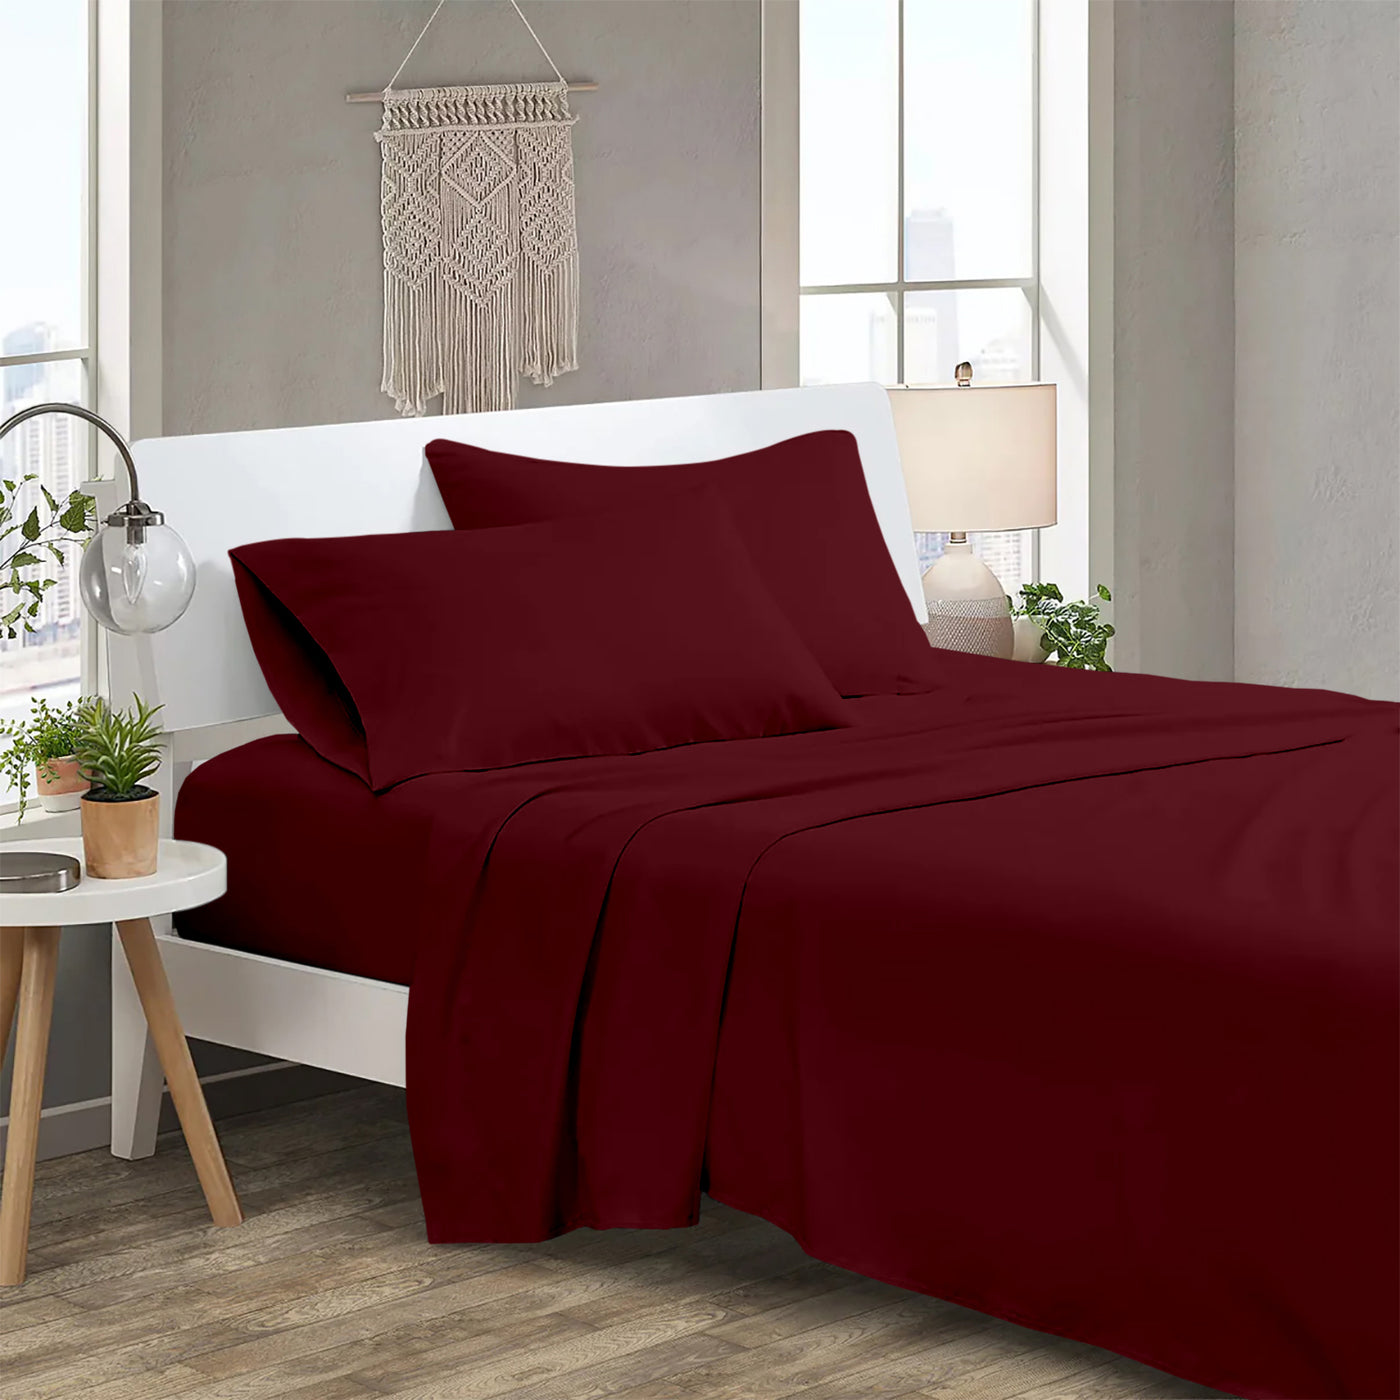 300 TC Egyptian Cotton 3 Piece Solid Flat Bed Sheet - Burgundy